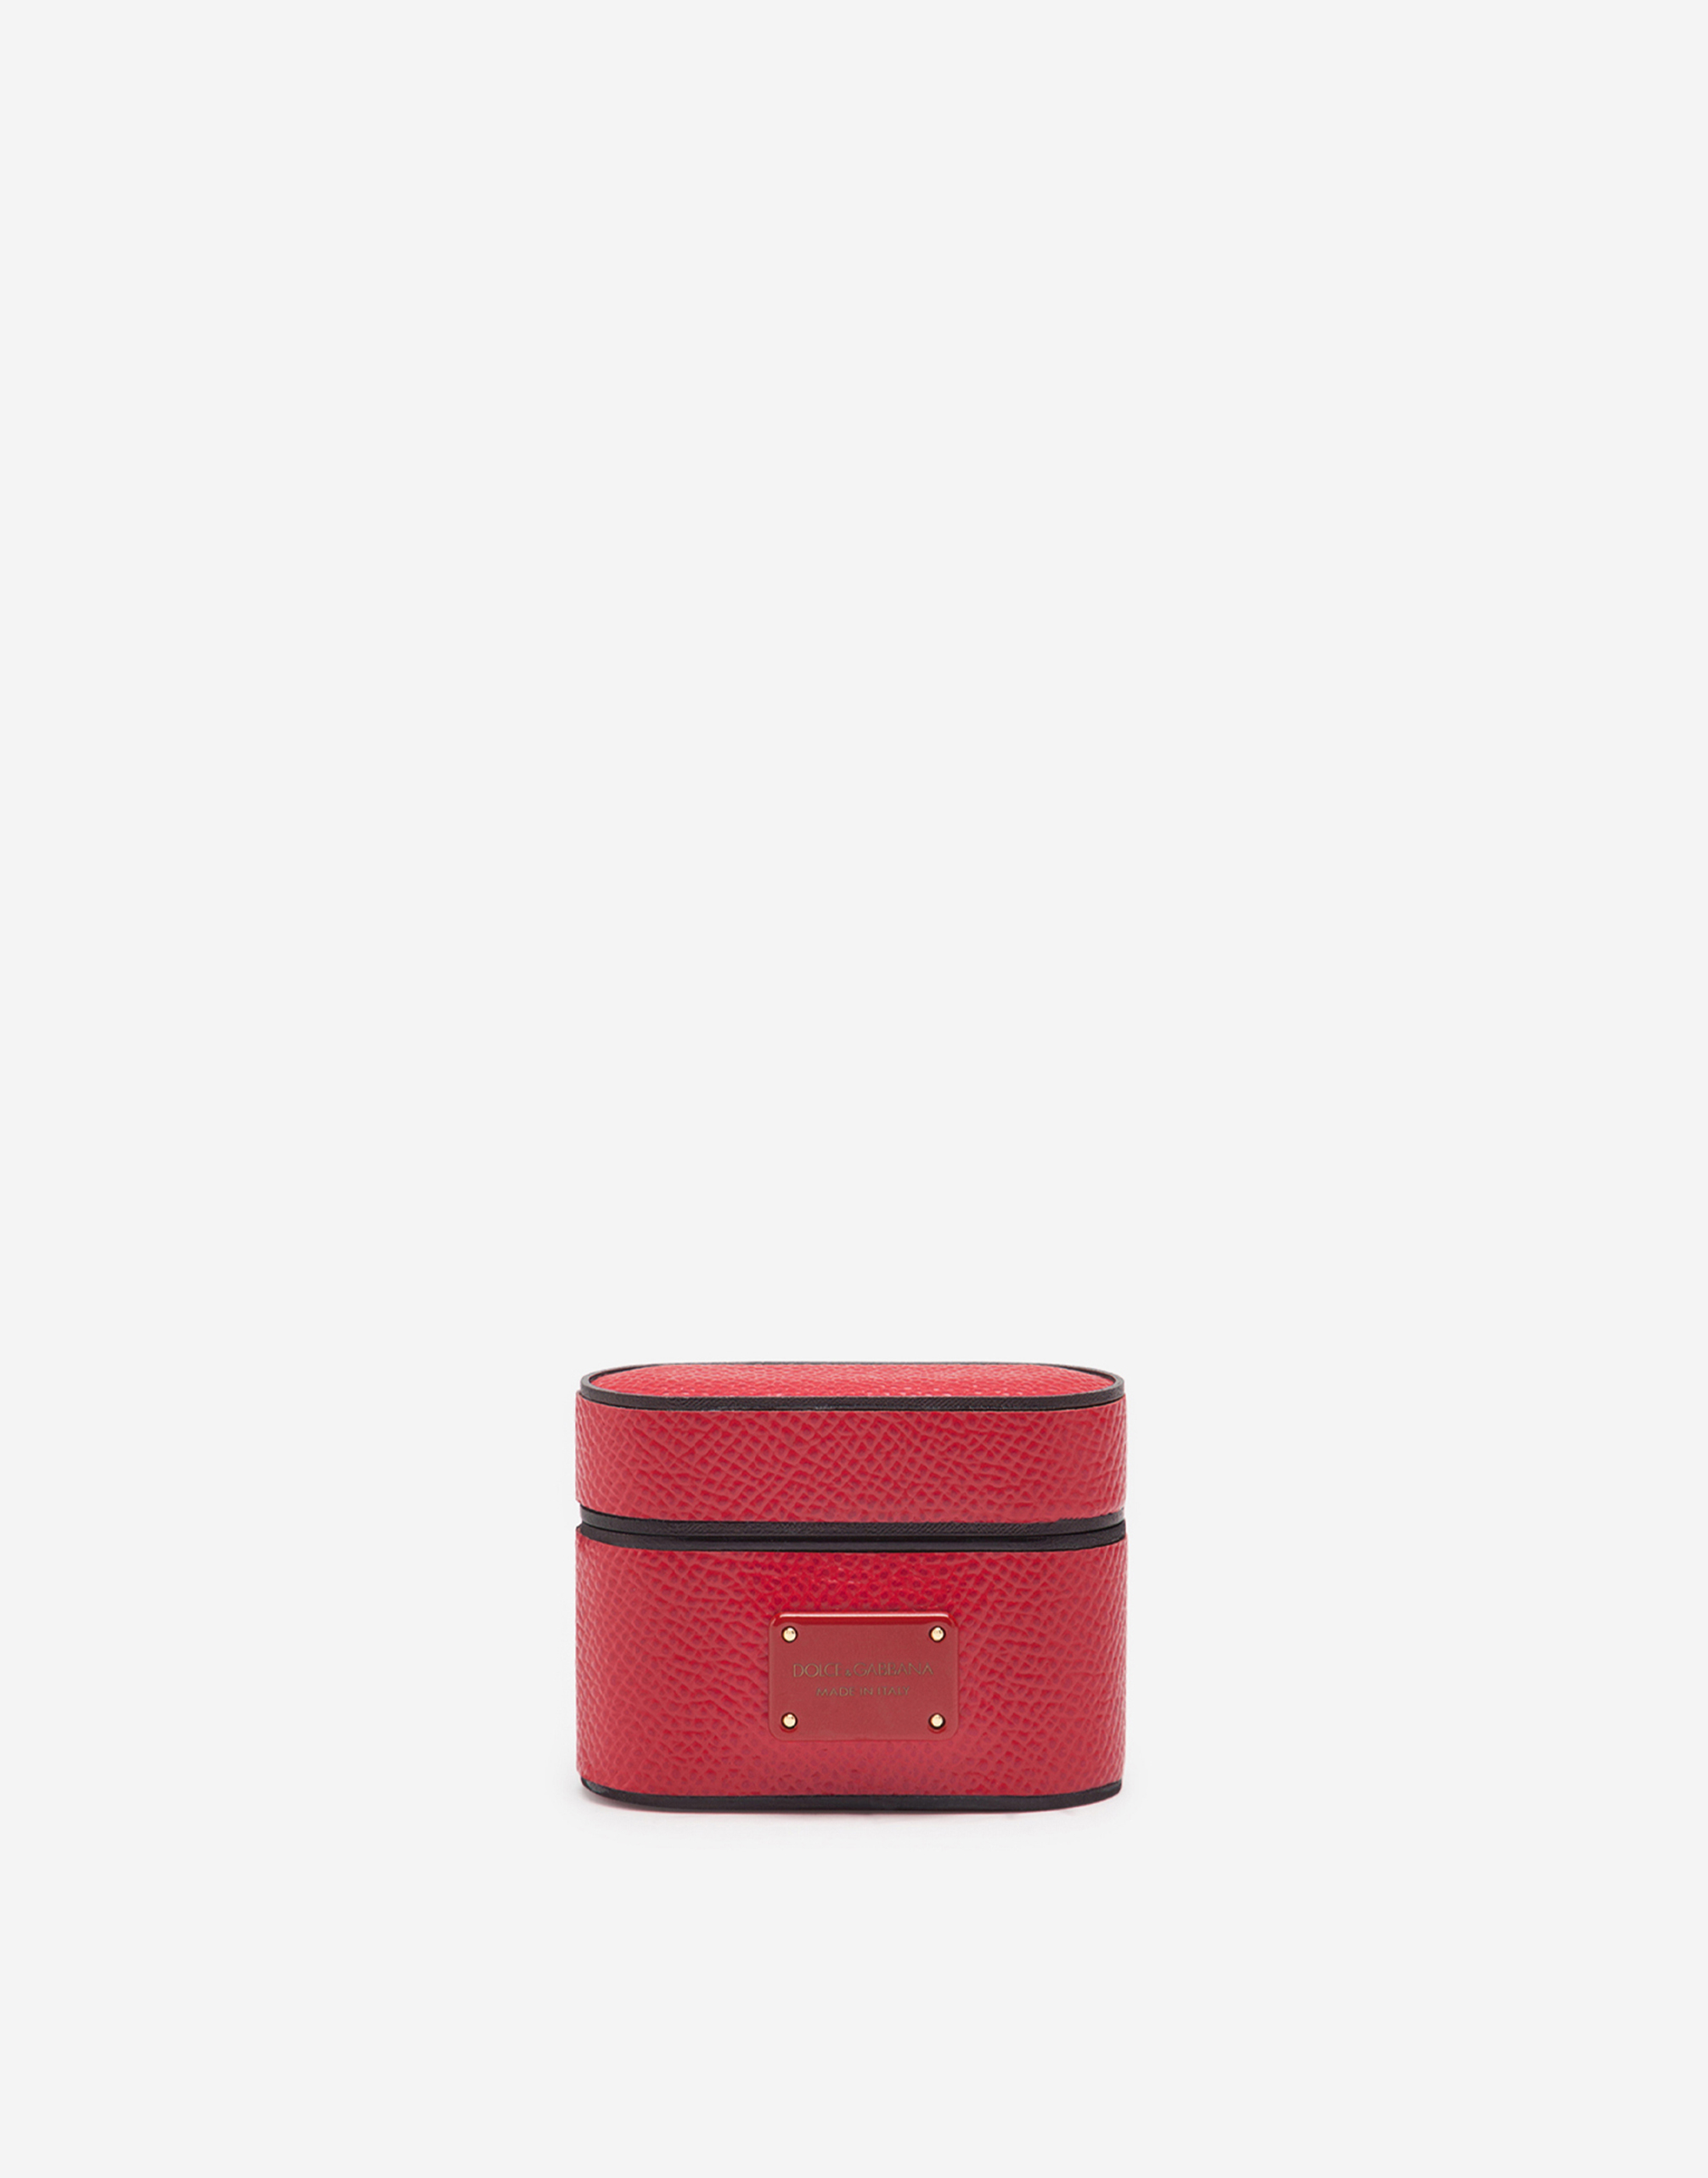 Dauphine calfskin airpods pro case in Red